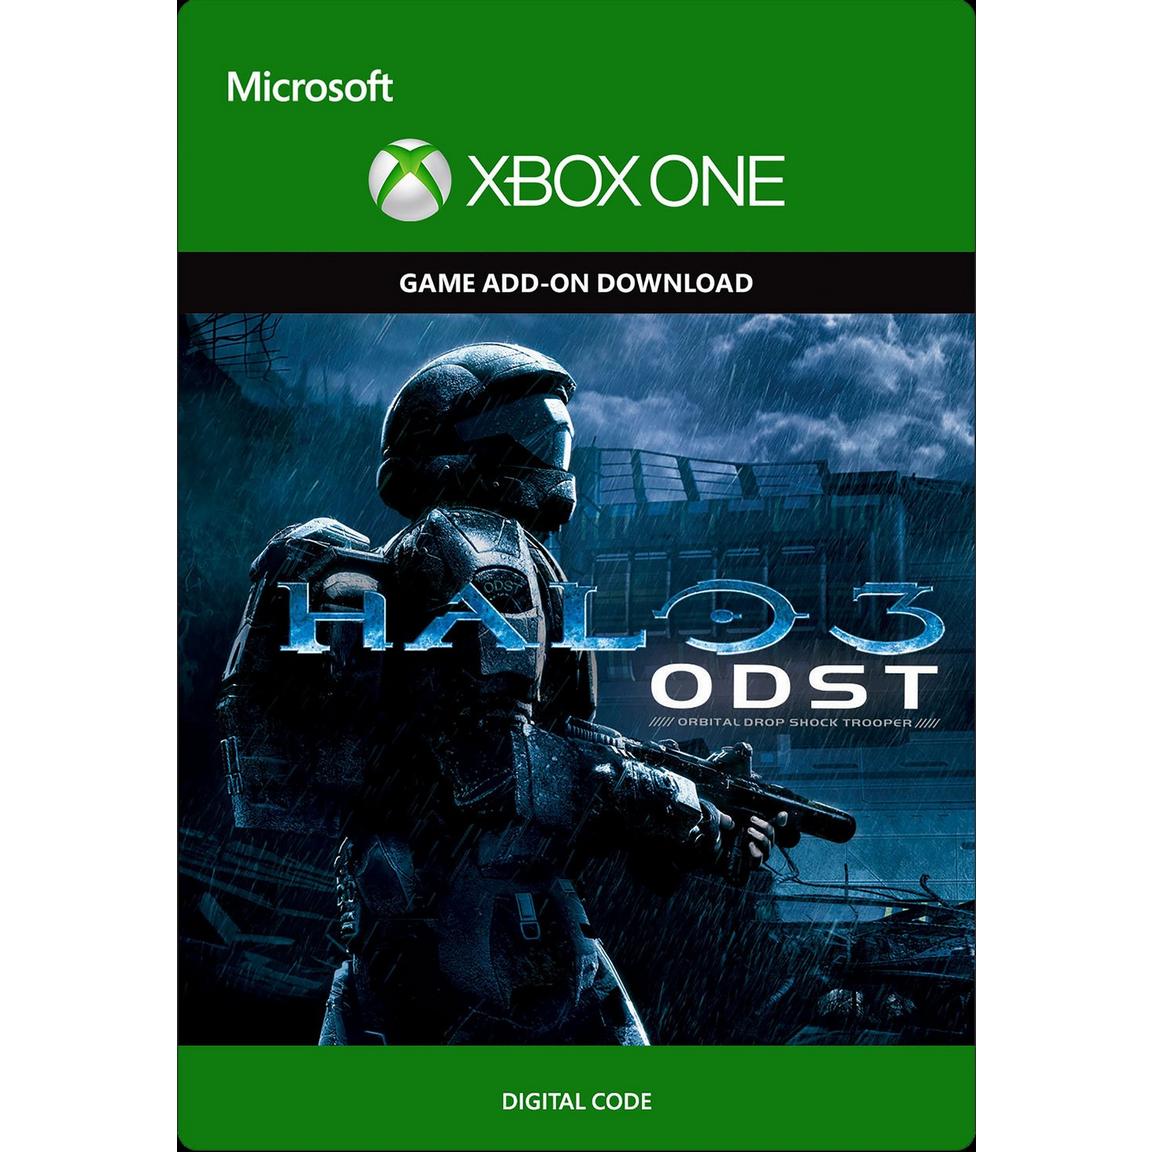 Halo: Master Chief Collection - Halo 3 ODST Campaign - Xbox One -  Microsoft, 7CN-00029